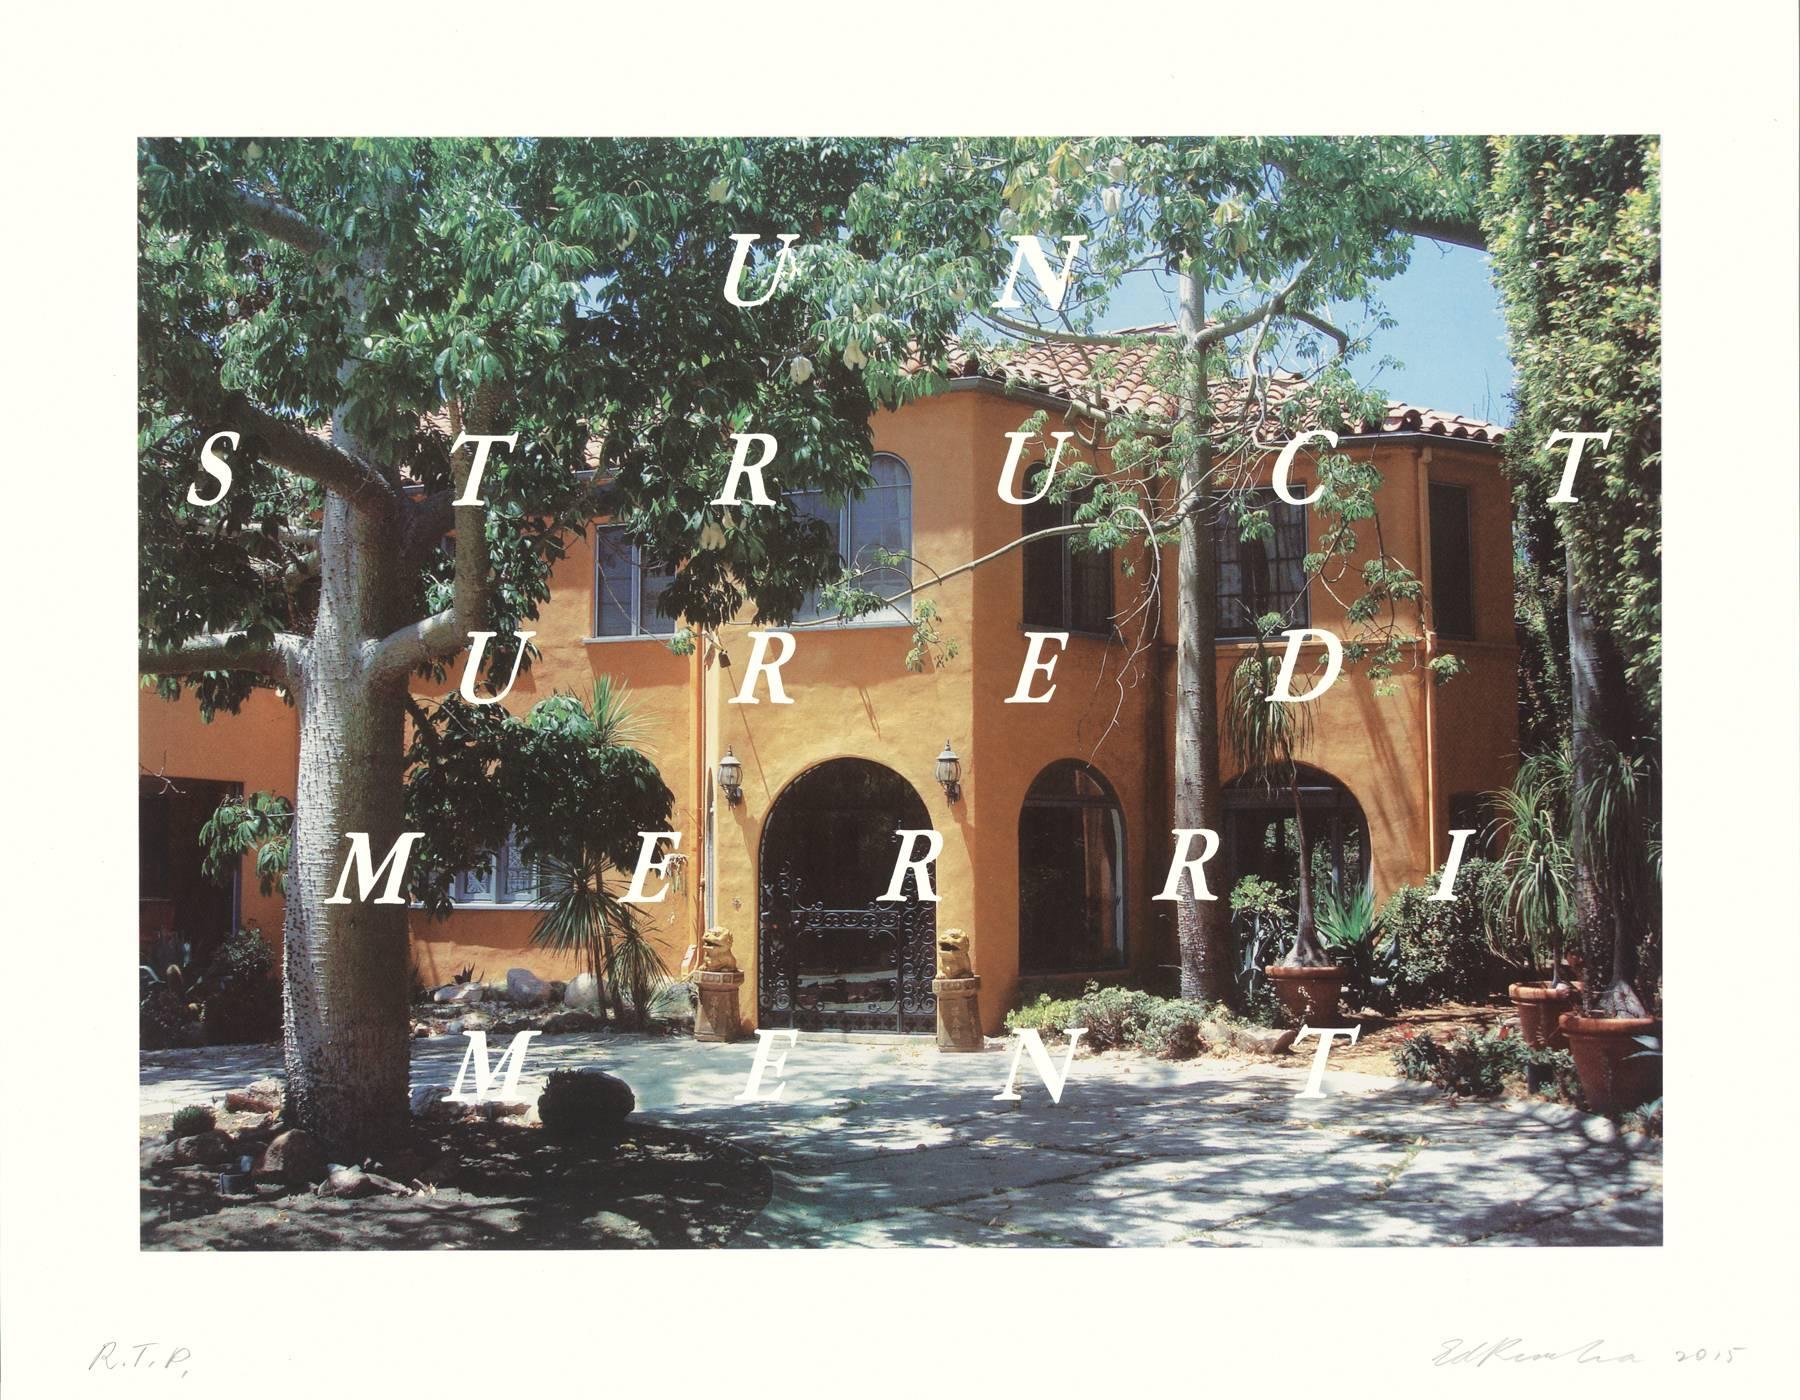 Unstructured Merriment - Print by Ed Ruscha